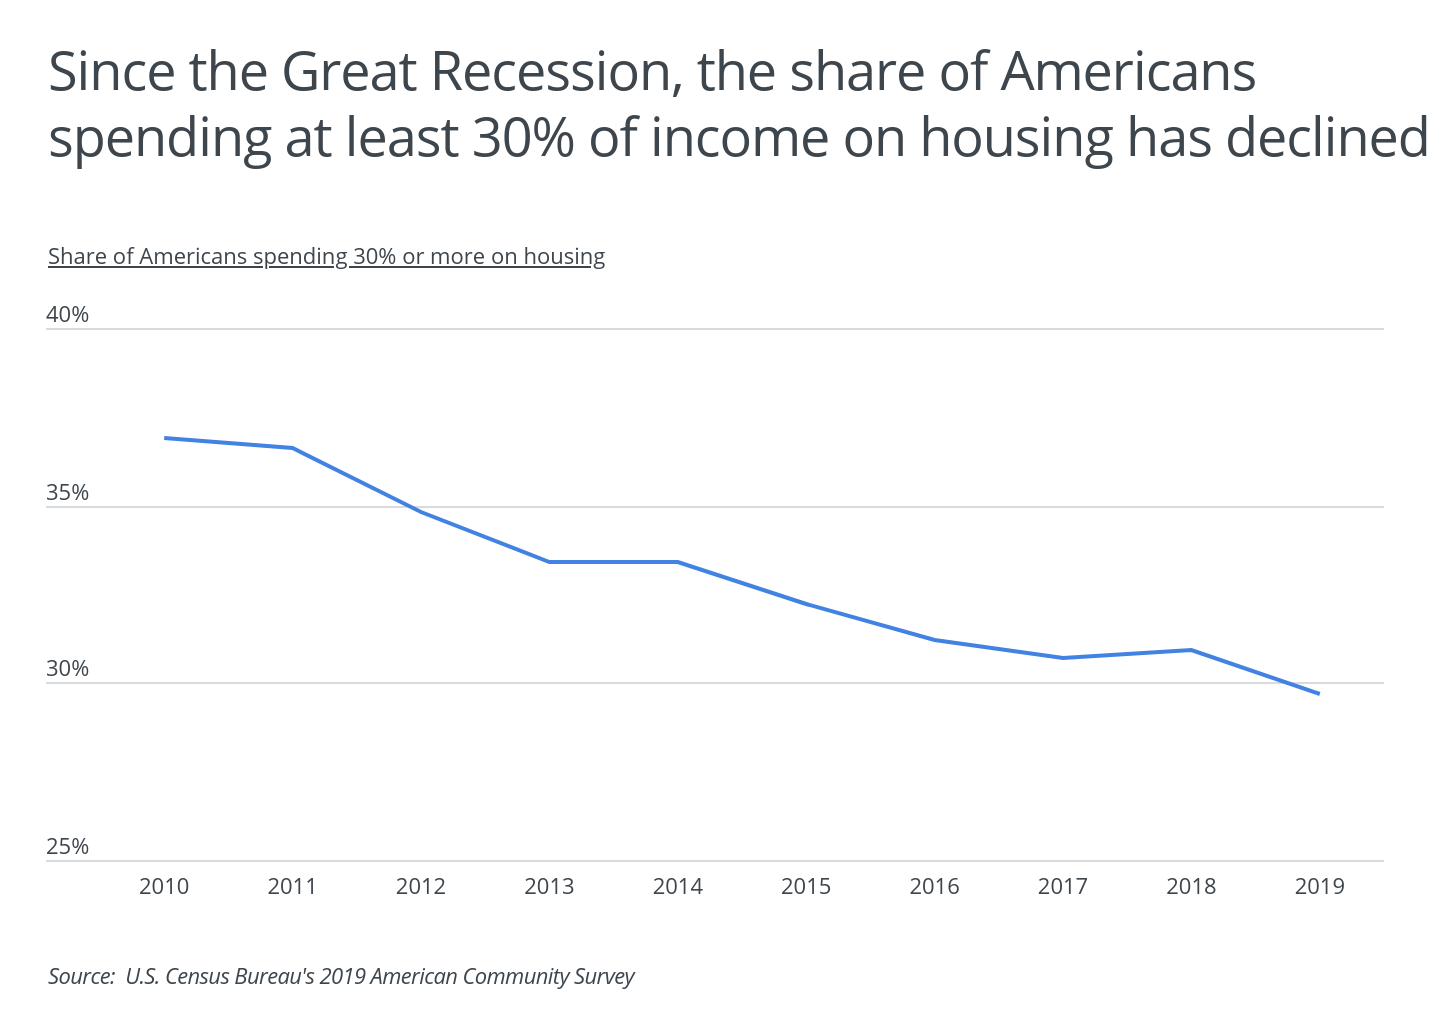 Since the Great Recession, the share of Americans spending at least 30% of income on housing has declined